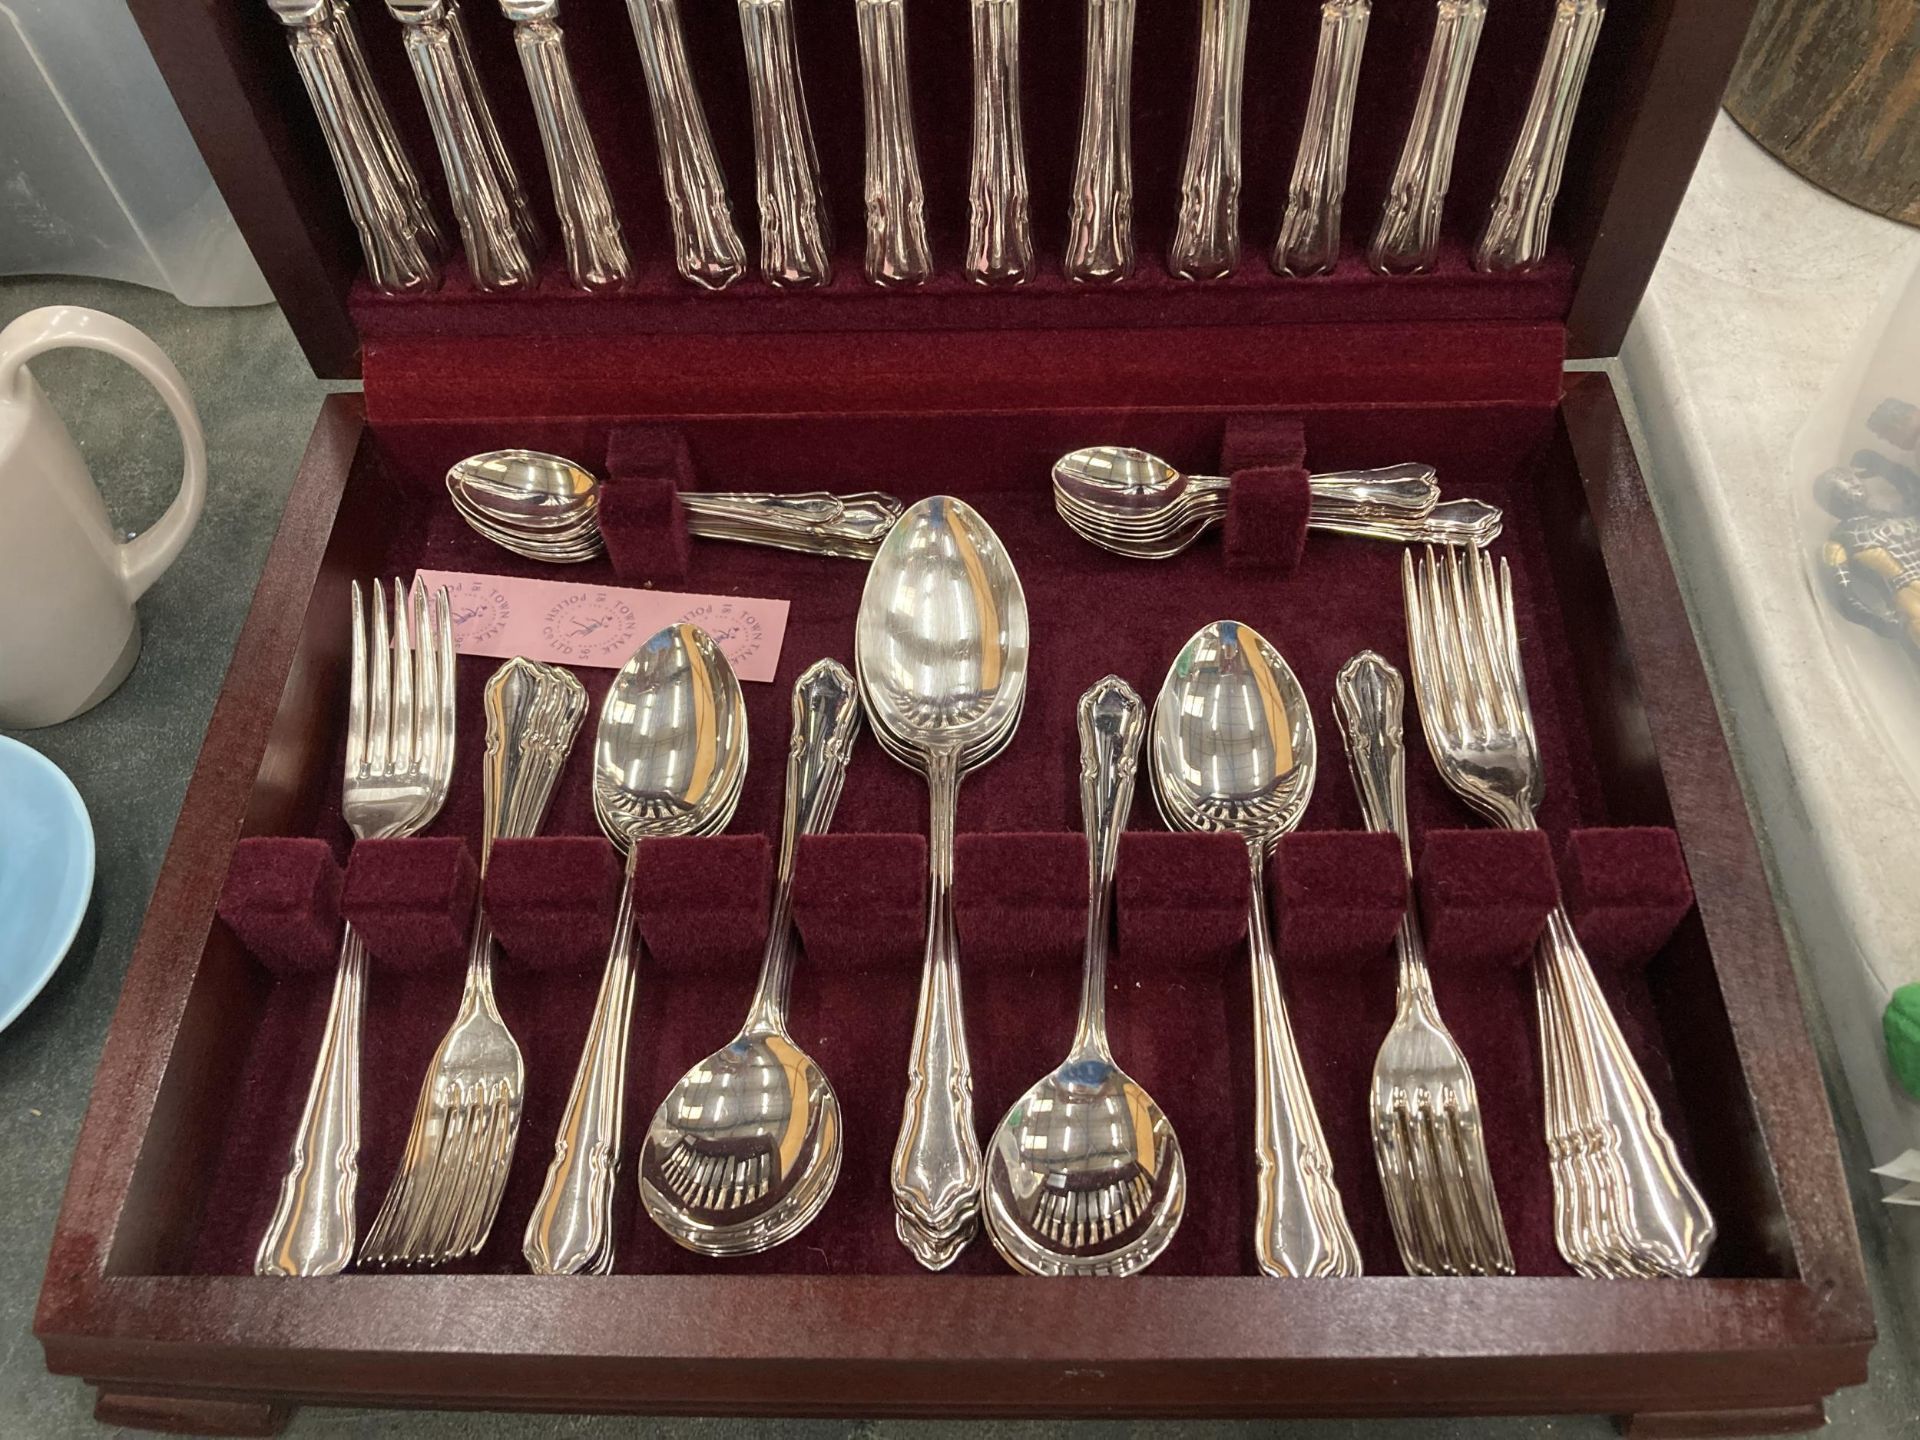 AN ONEIDA CANTEEN OF CUTLERY IN A WOODEN BOX - Image 2 of 4